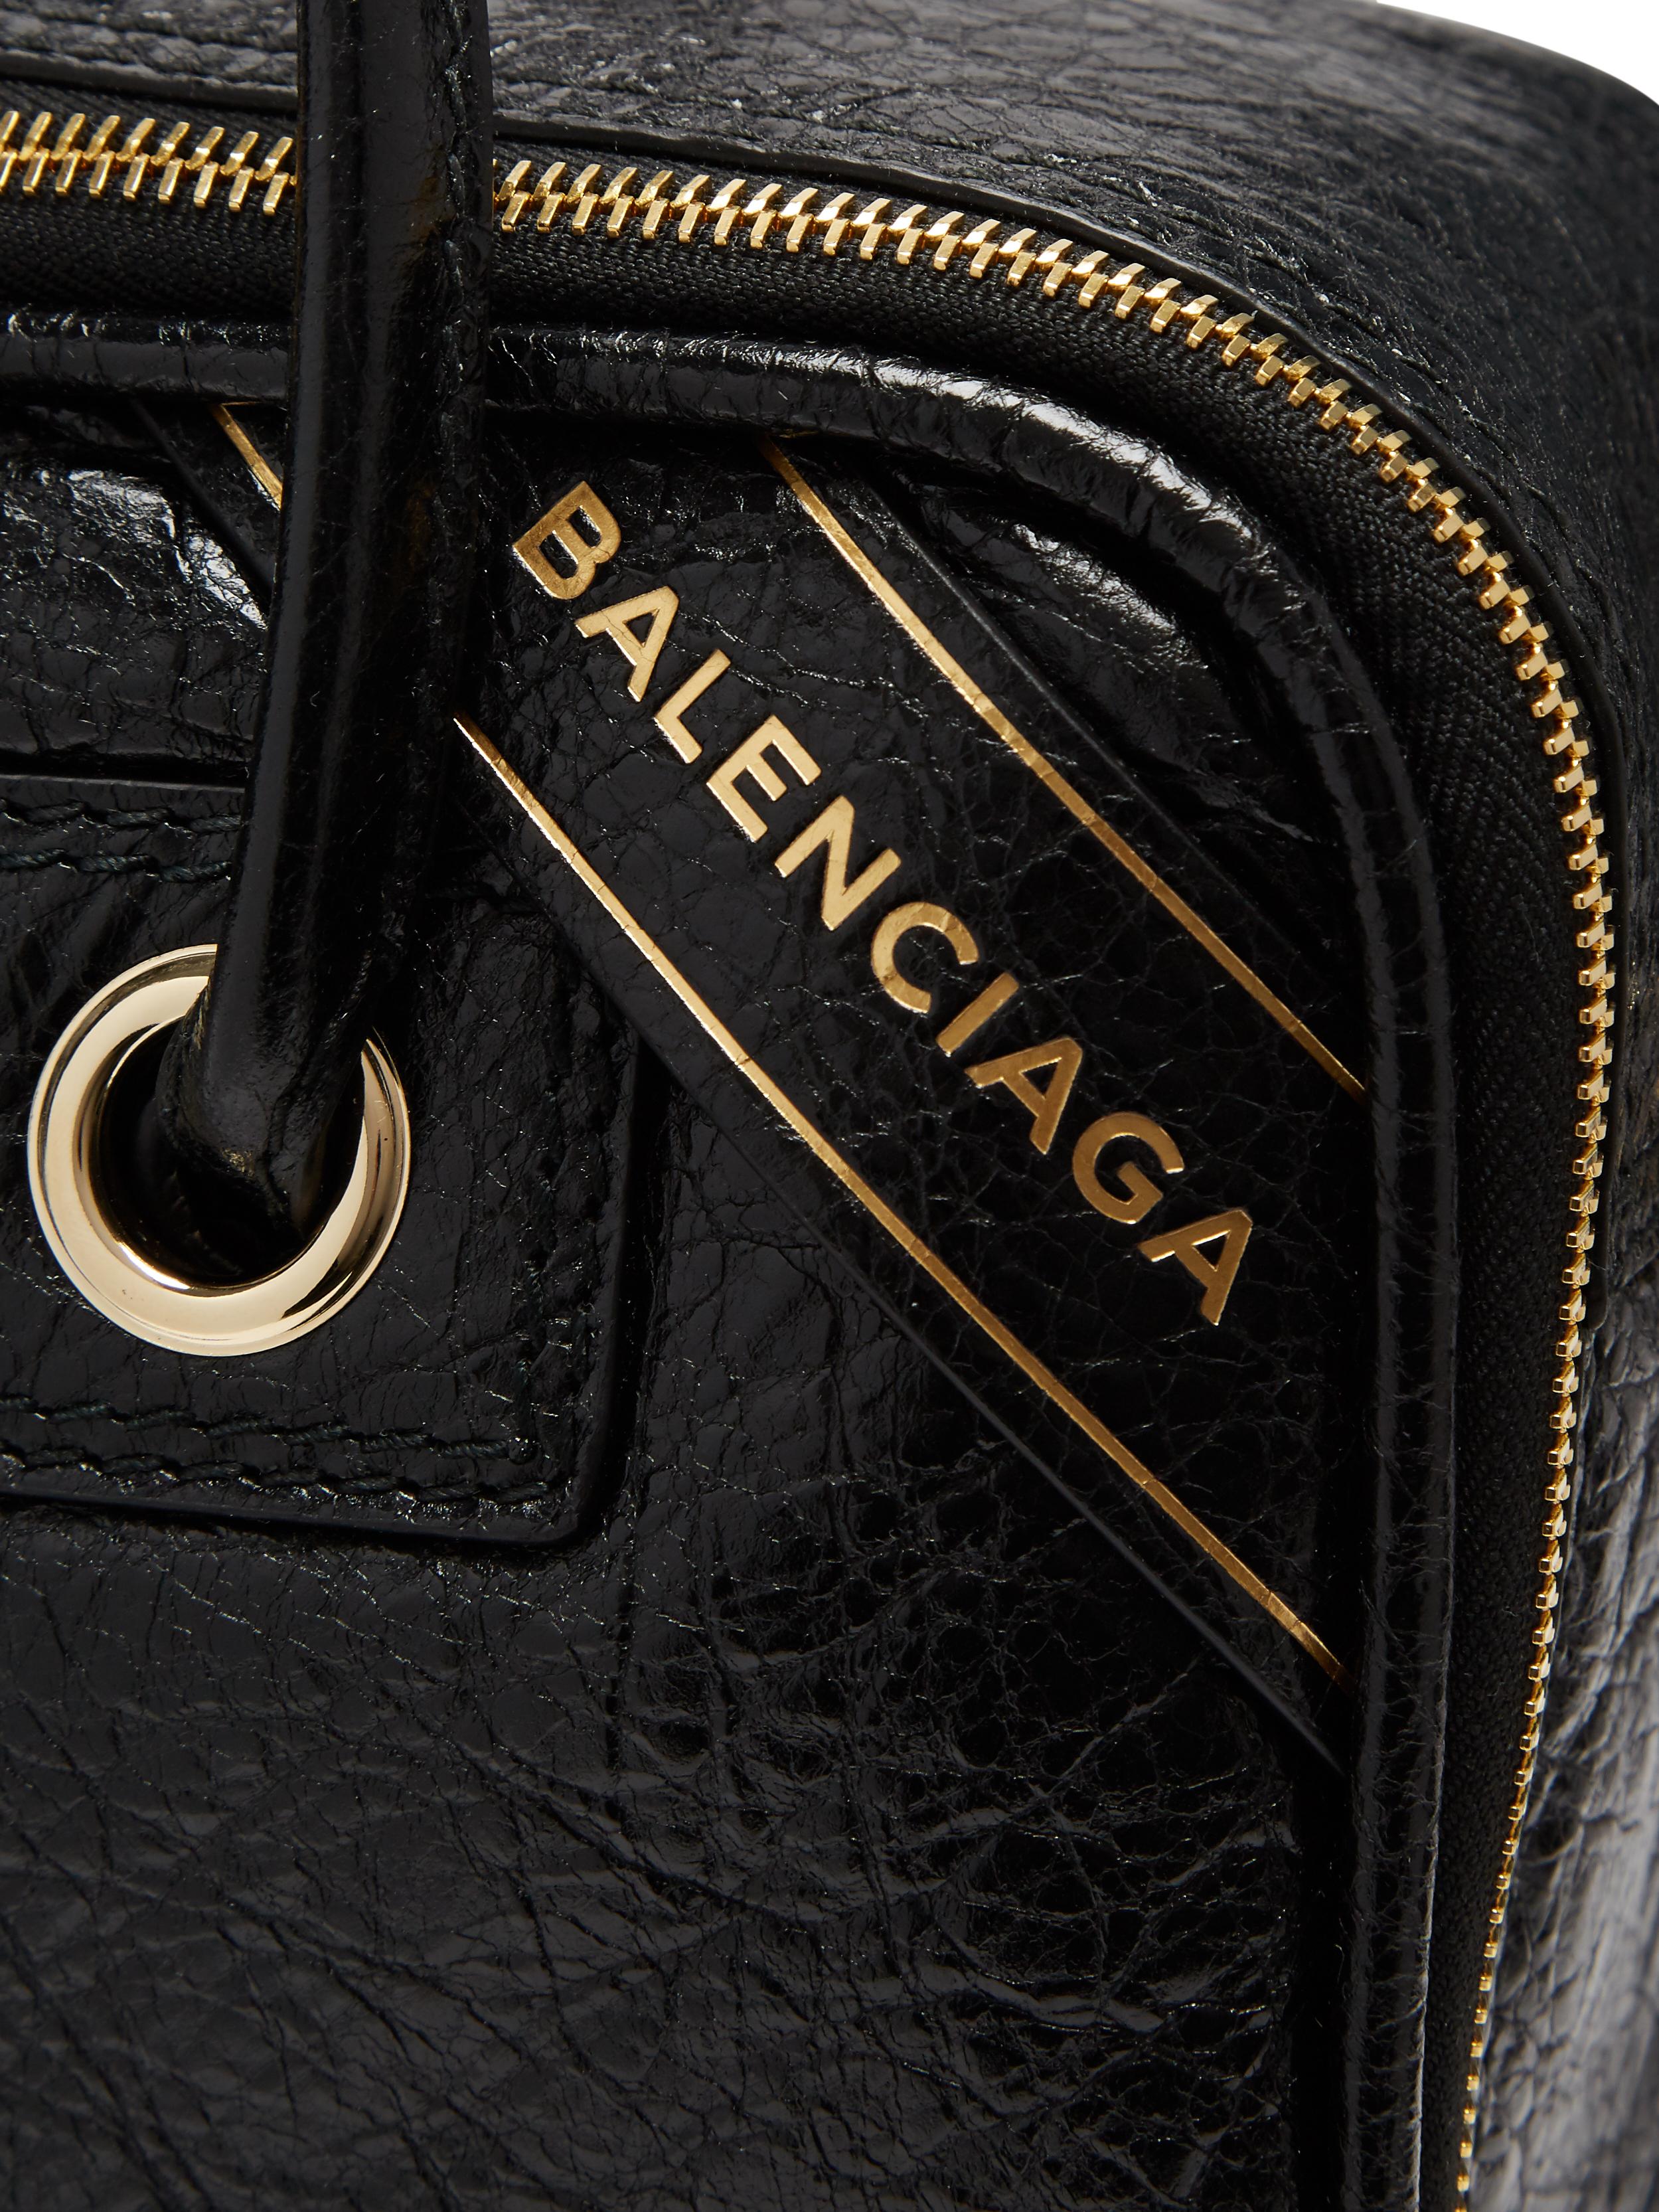 Balenciaga Blanket Square Small Leather Bag in Black | Lyst